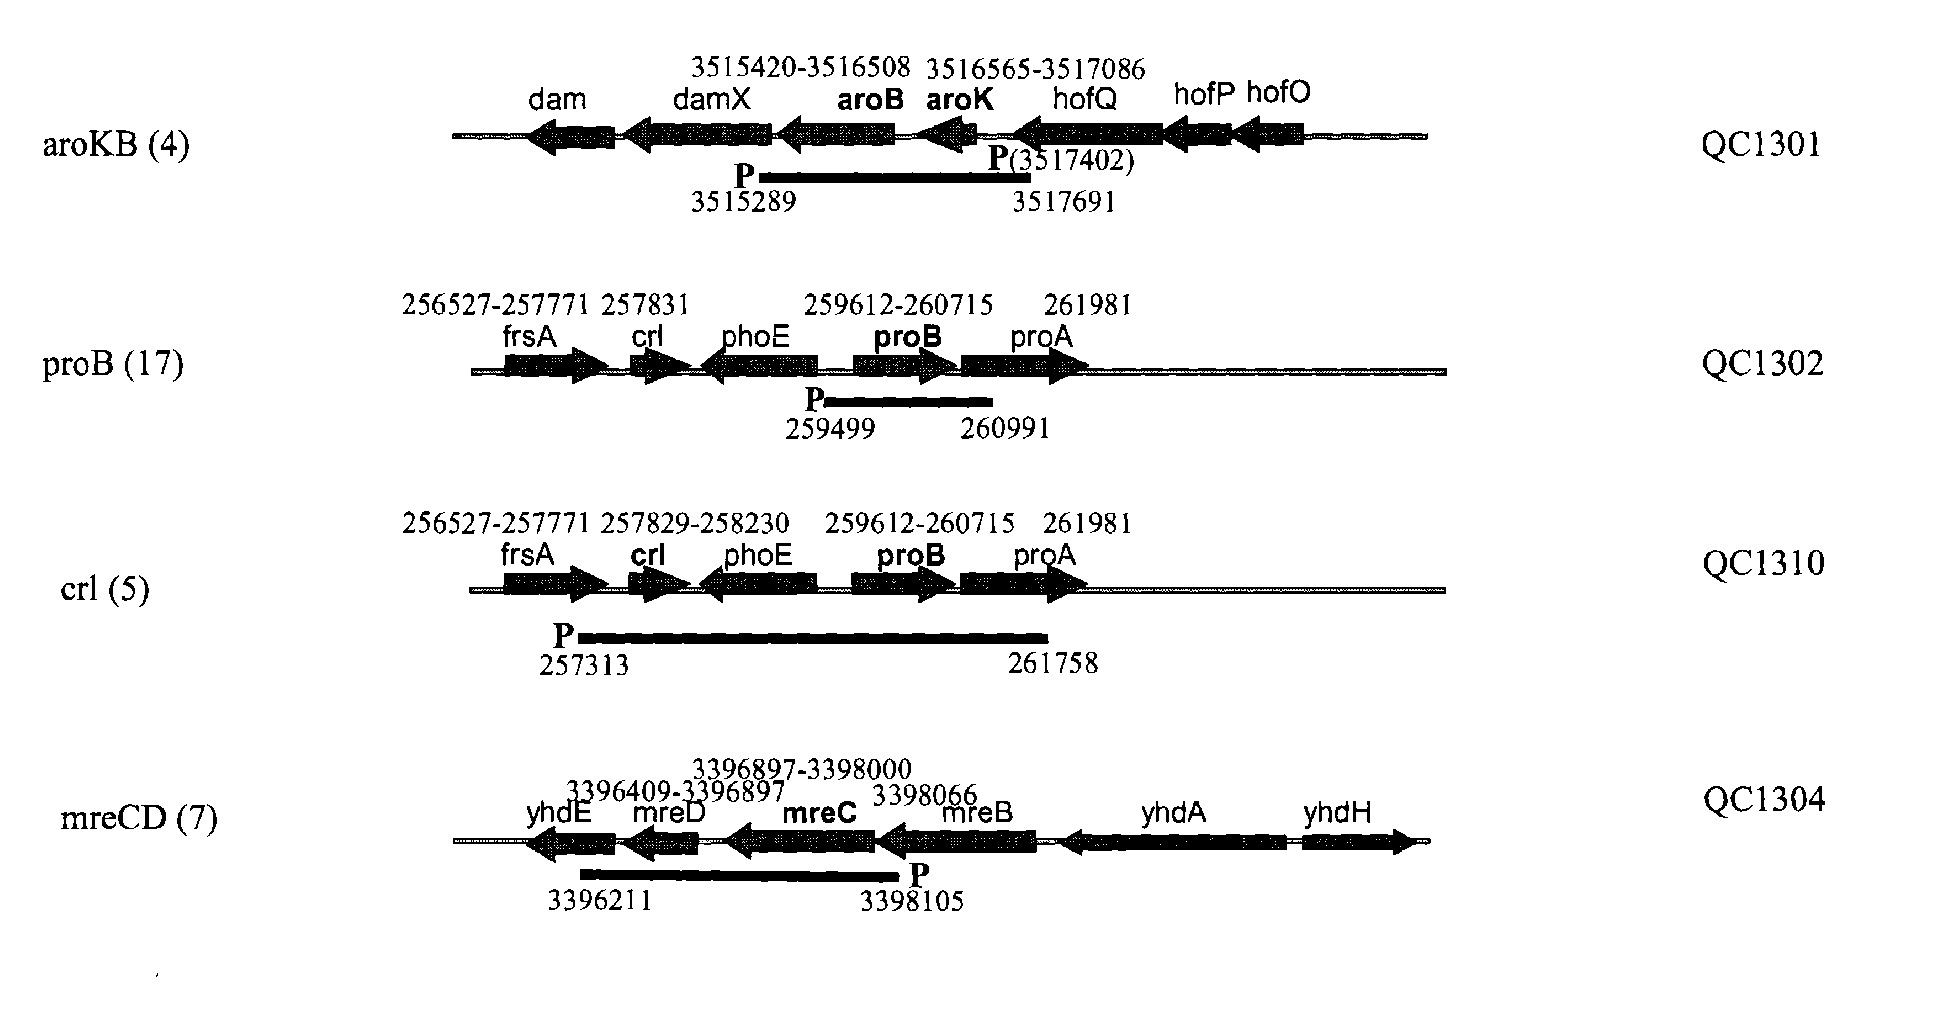 Genes that increase peptide production